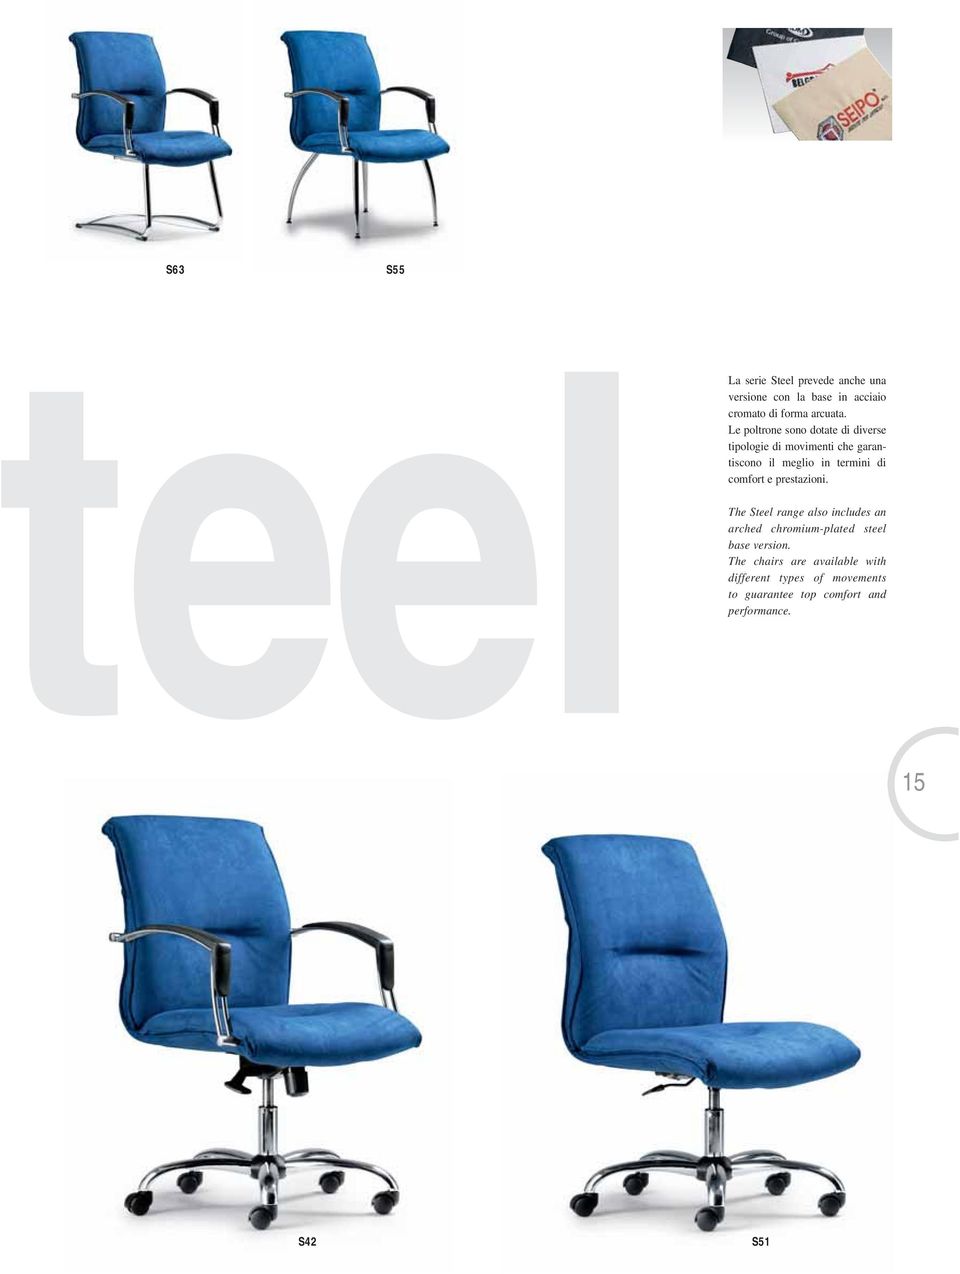 comfort e prestazioni. The Steel range also includes an arched chromium-plated steel base version.